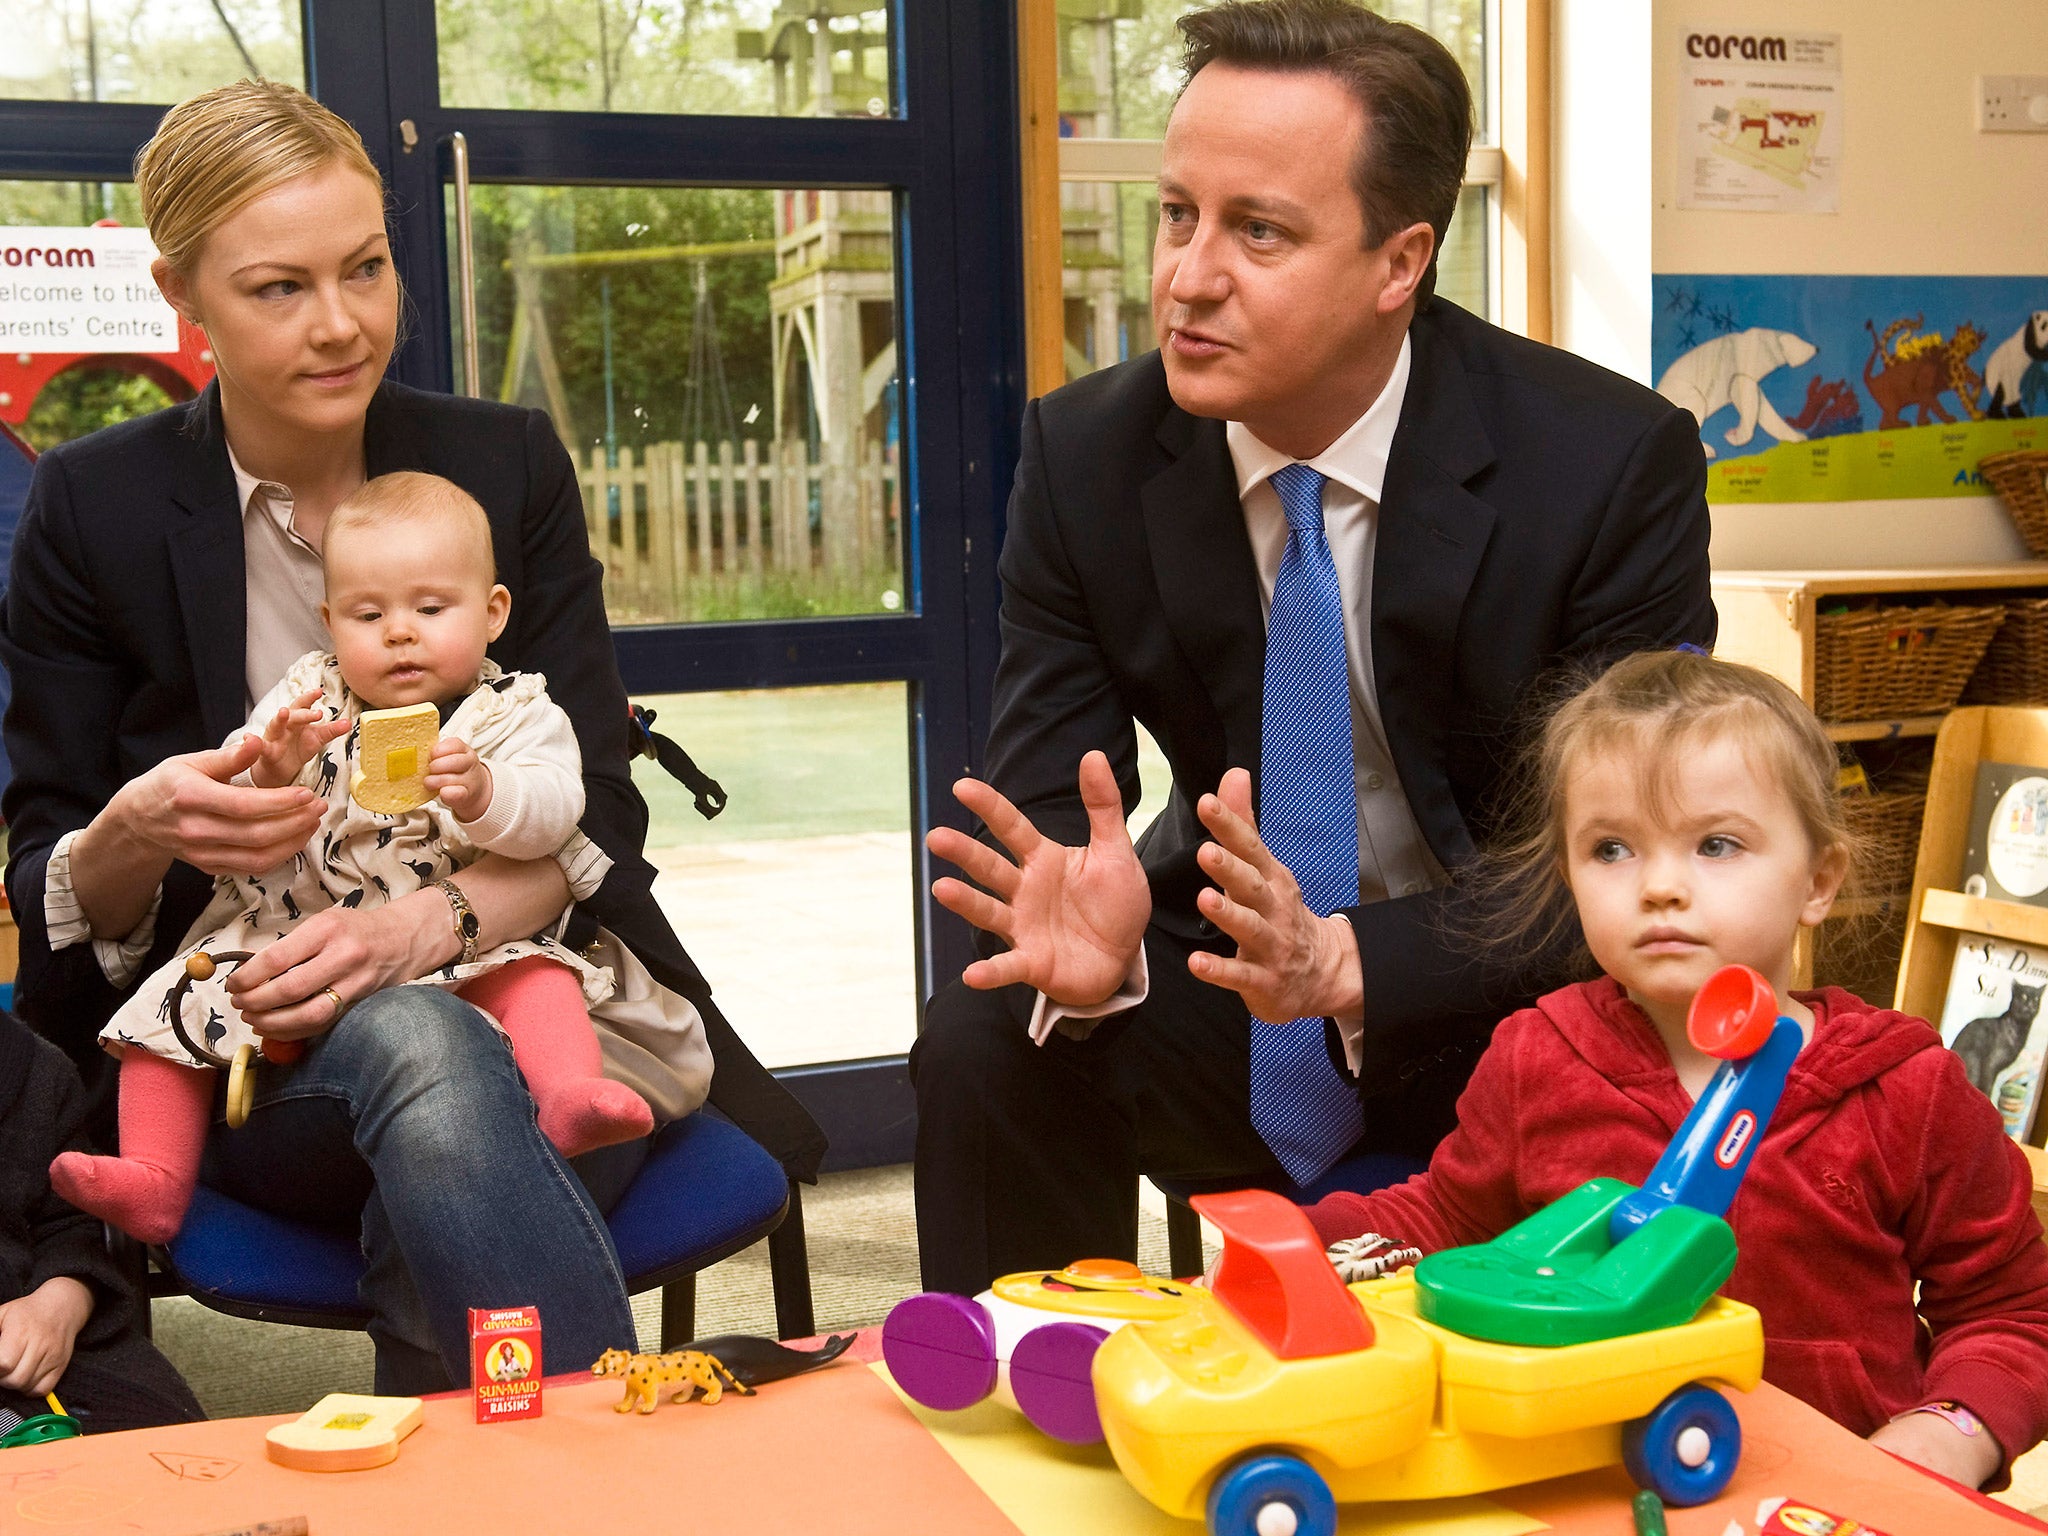 David Cameron meets with parents in 2012